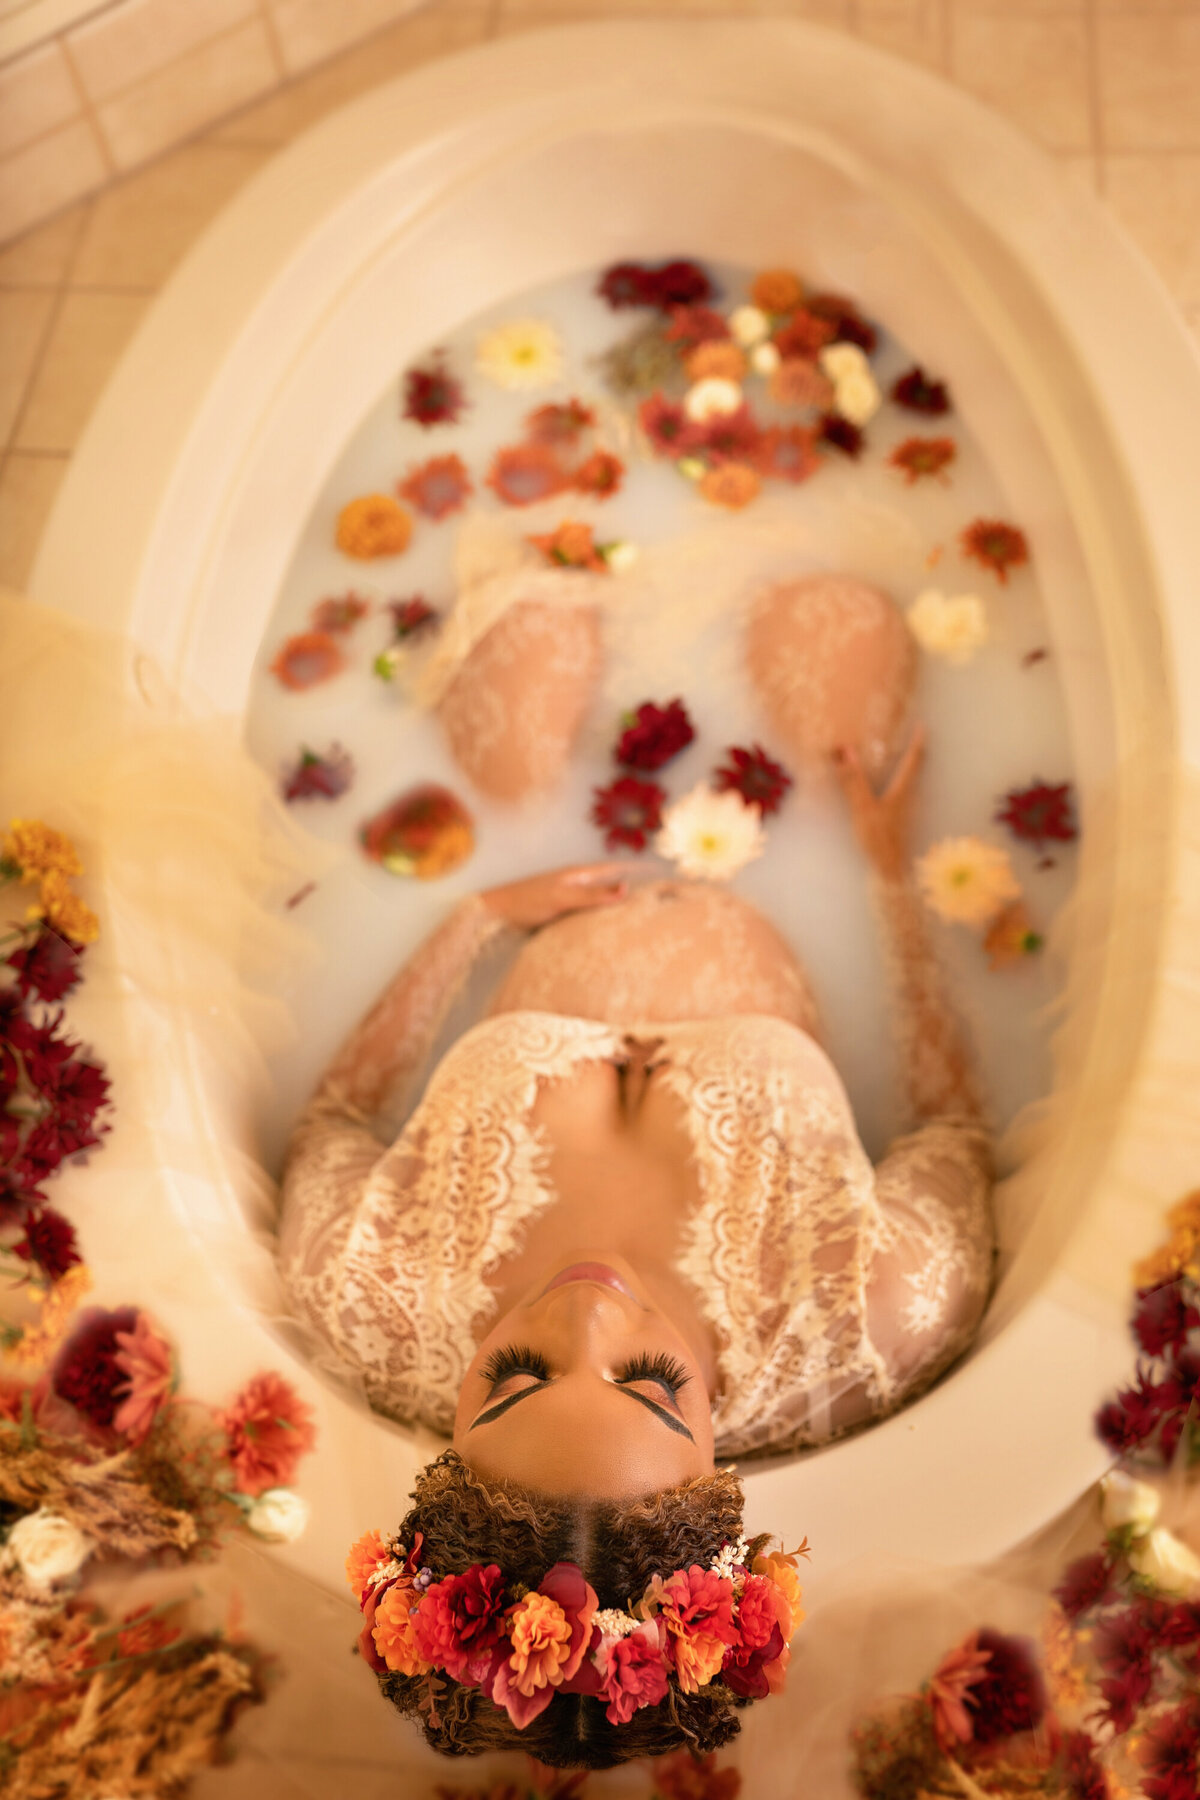 Black woman with a floral crown wearing a beige lace dress that shows off her pregnant belly.  She is leaning back against the bathtub and has her eyes closed.  Her hair is pulled back and she has long eyelashes.  There are yellow, red, and white flowers floating in the milk water.